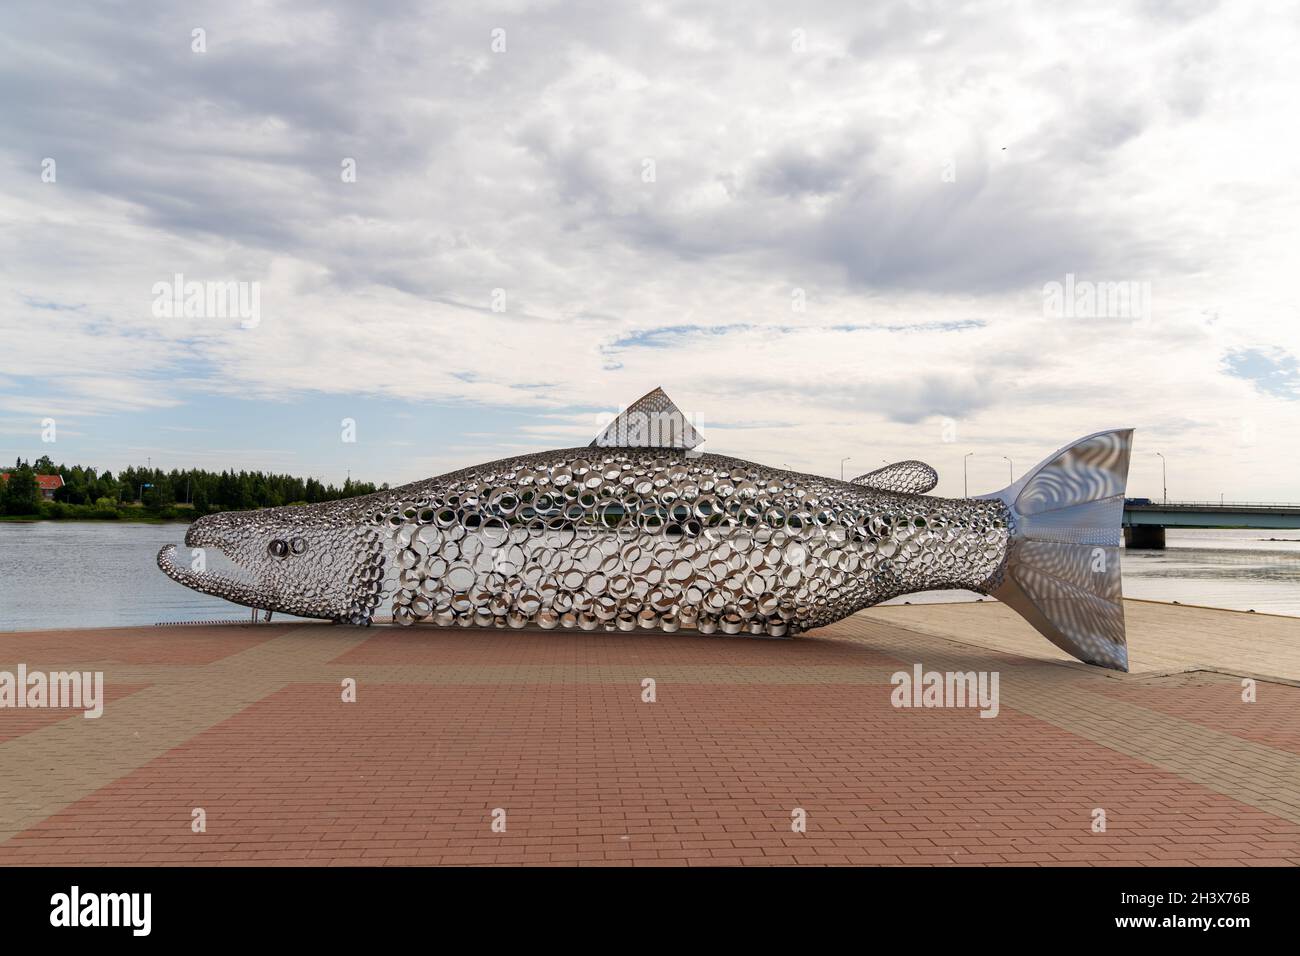 View of the anniversary celebration sculpture of a large metal salmon in the city center of Tornio Stock Photo